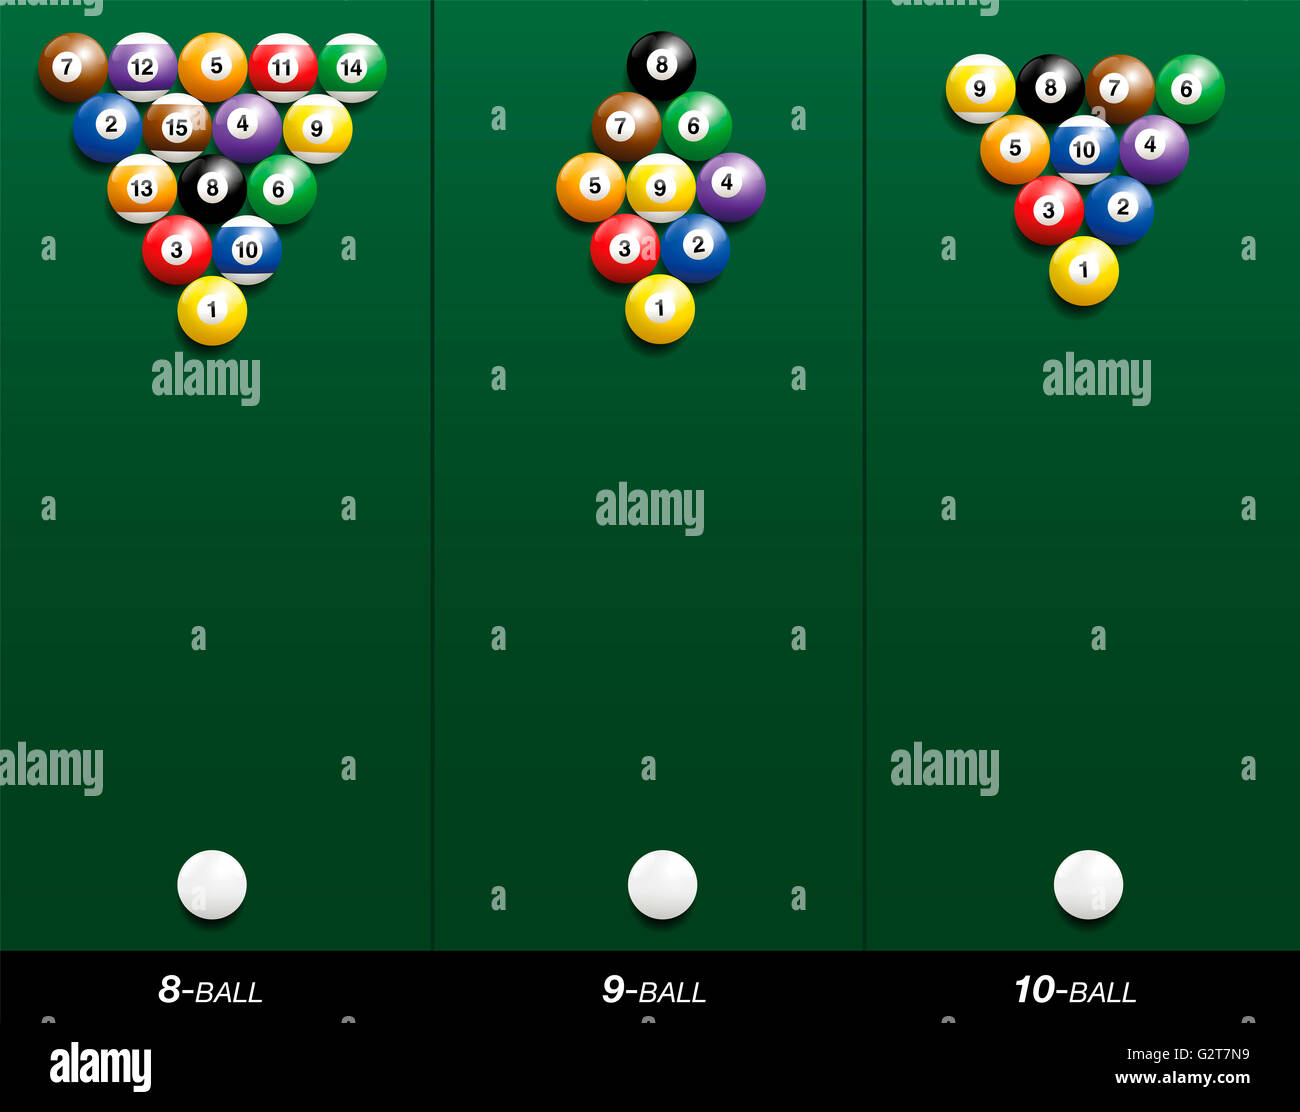 Billiard starting positions - eight-ball, nine-ball and ten-ball. Three-dimensional illustration on green gradient background. Stock Photo